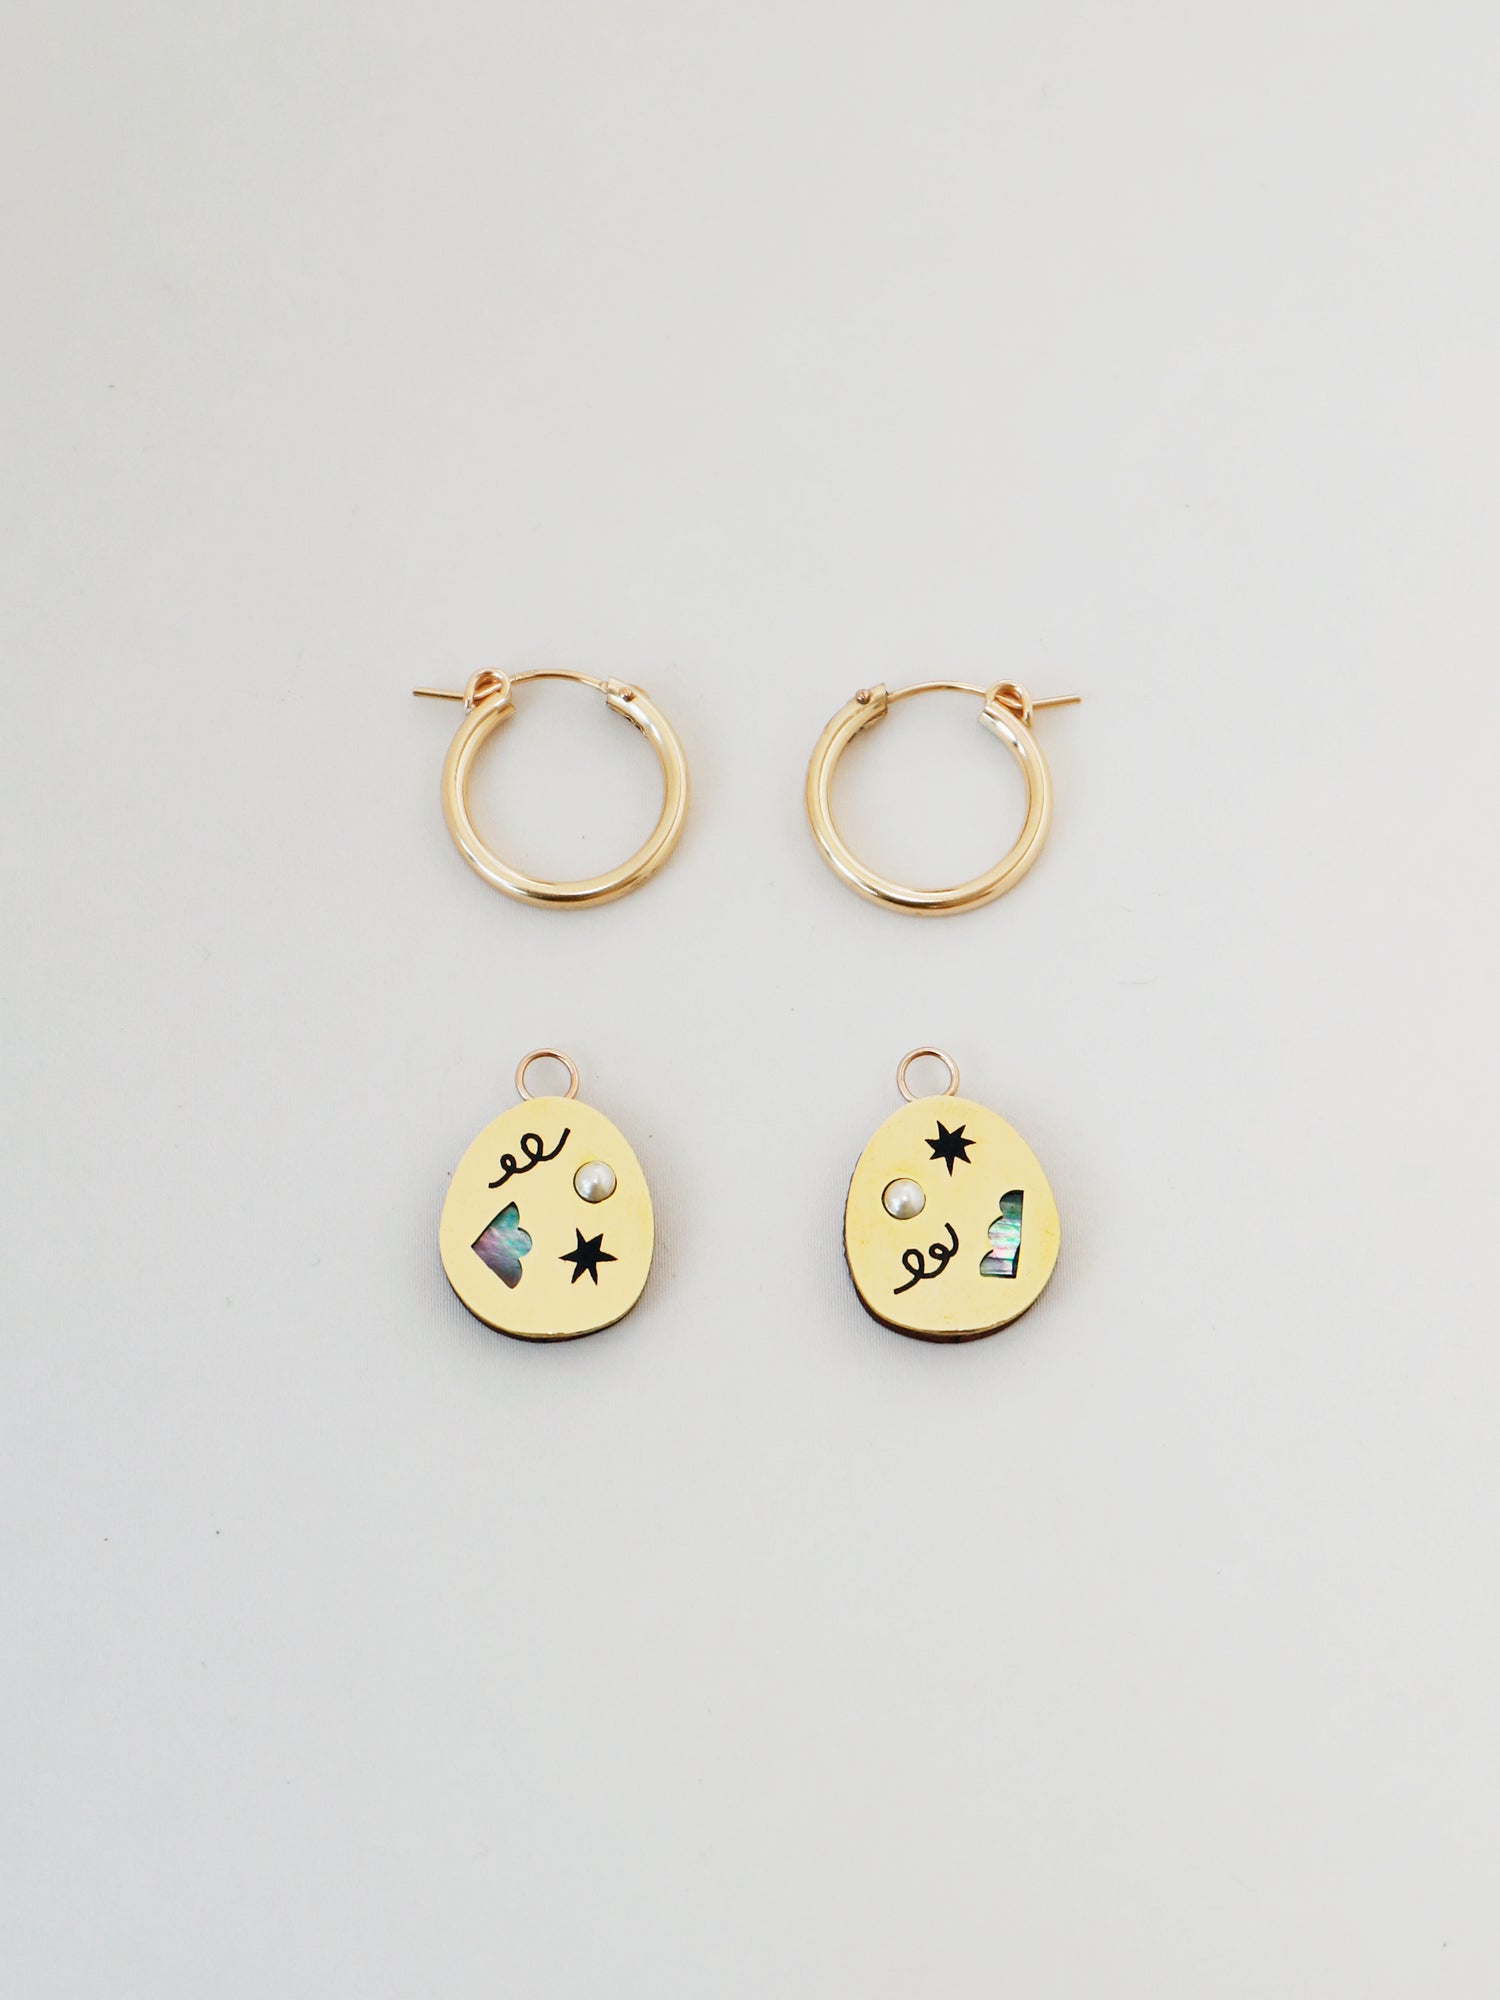 Elegant brass hoop earrings with an illustrative design inspired by celebrations & confetti. Glass pearls and abstract cut outs with inlaid shell in emerald green. Handmade in the UK by Wolf & Moon.